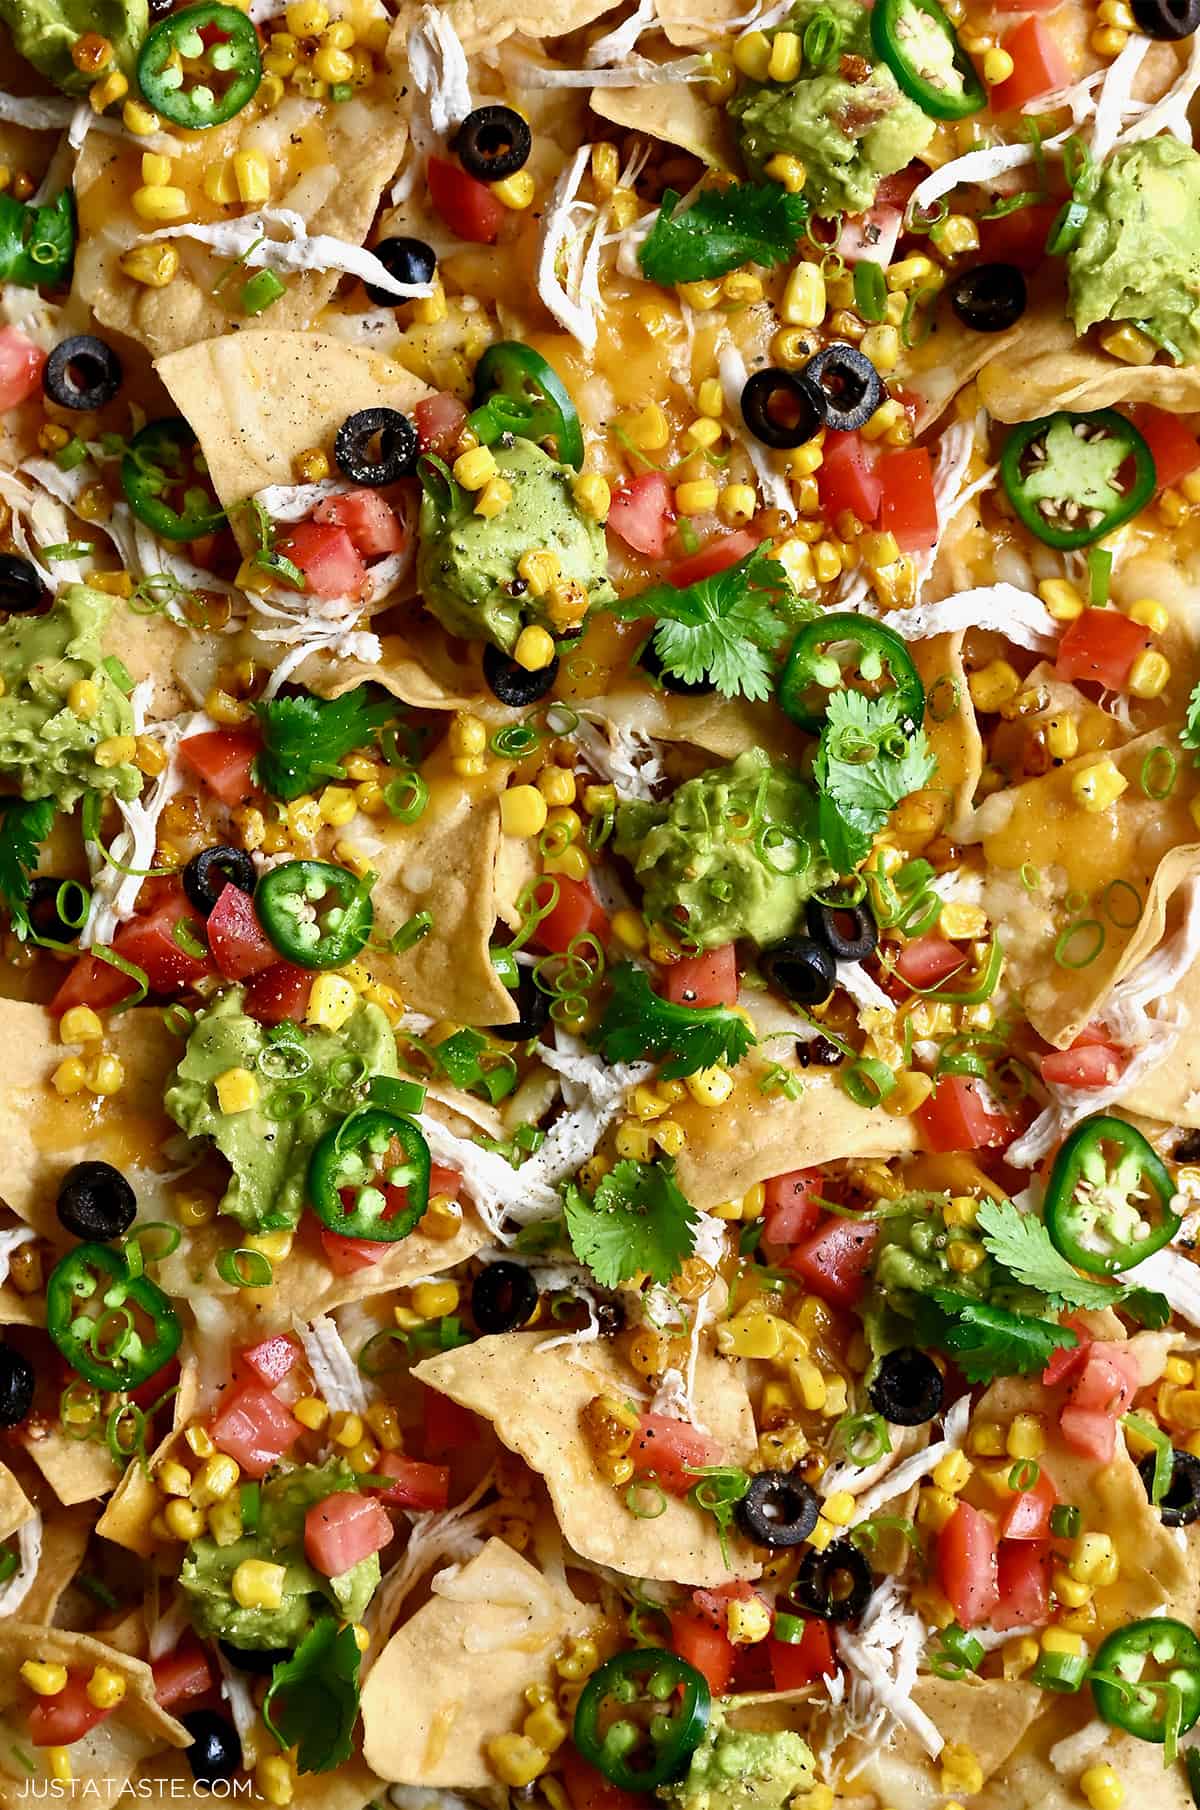 A closeup view of nachos with sliced jalapeños, diced tomatoes, corn kernels, sliced black olives, shredded cheese and shredded chicken.